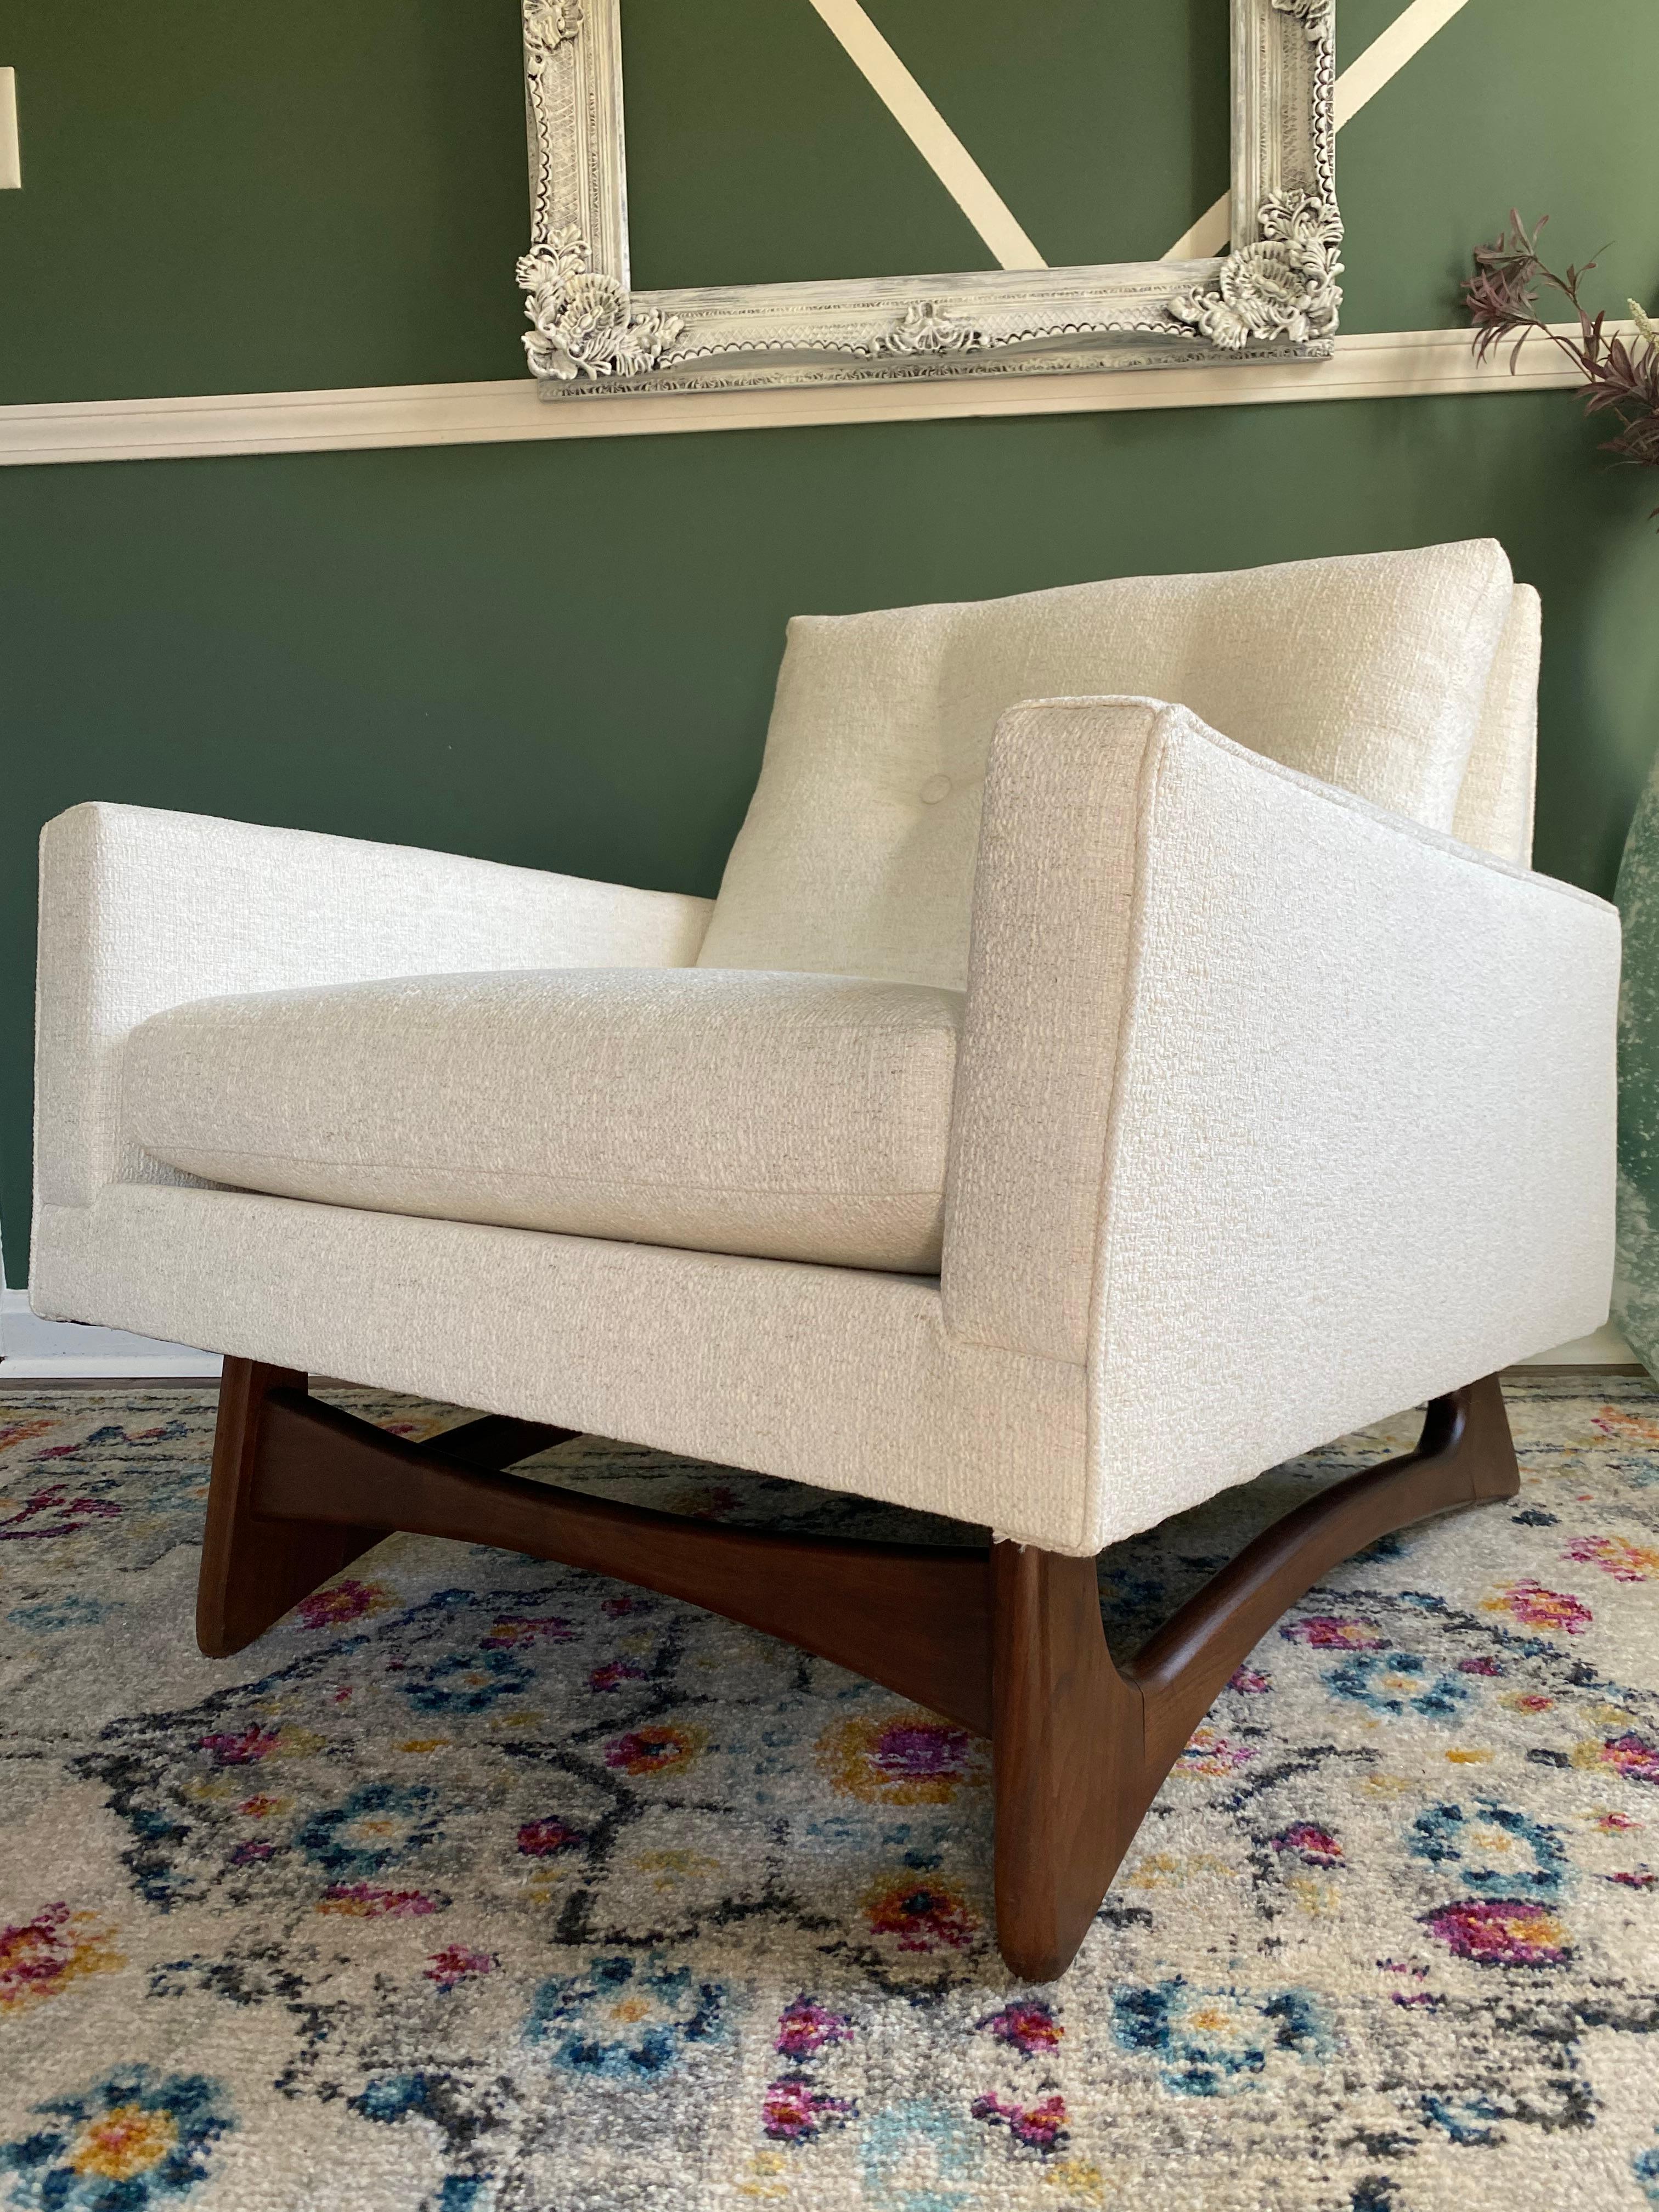 Mid-Century Modern Adrian Pearsall lounge chair by Craft Associates, 2406 reupholstered using Crypton finished off-white boucle fabric, which offers a stain-resistant finish. All new foam and cotton batting included as well. This Pearsall piece